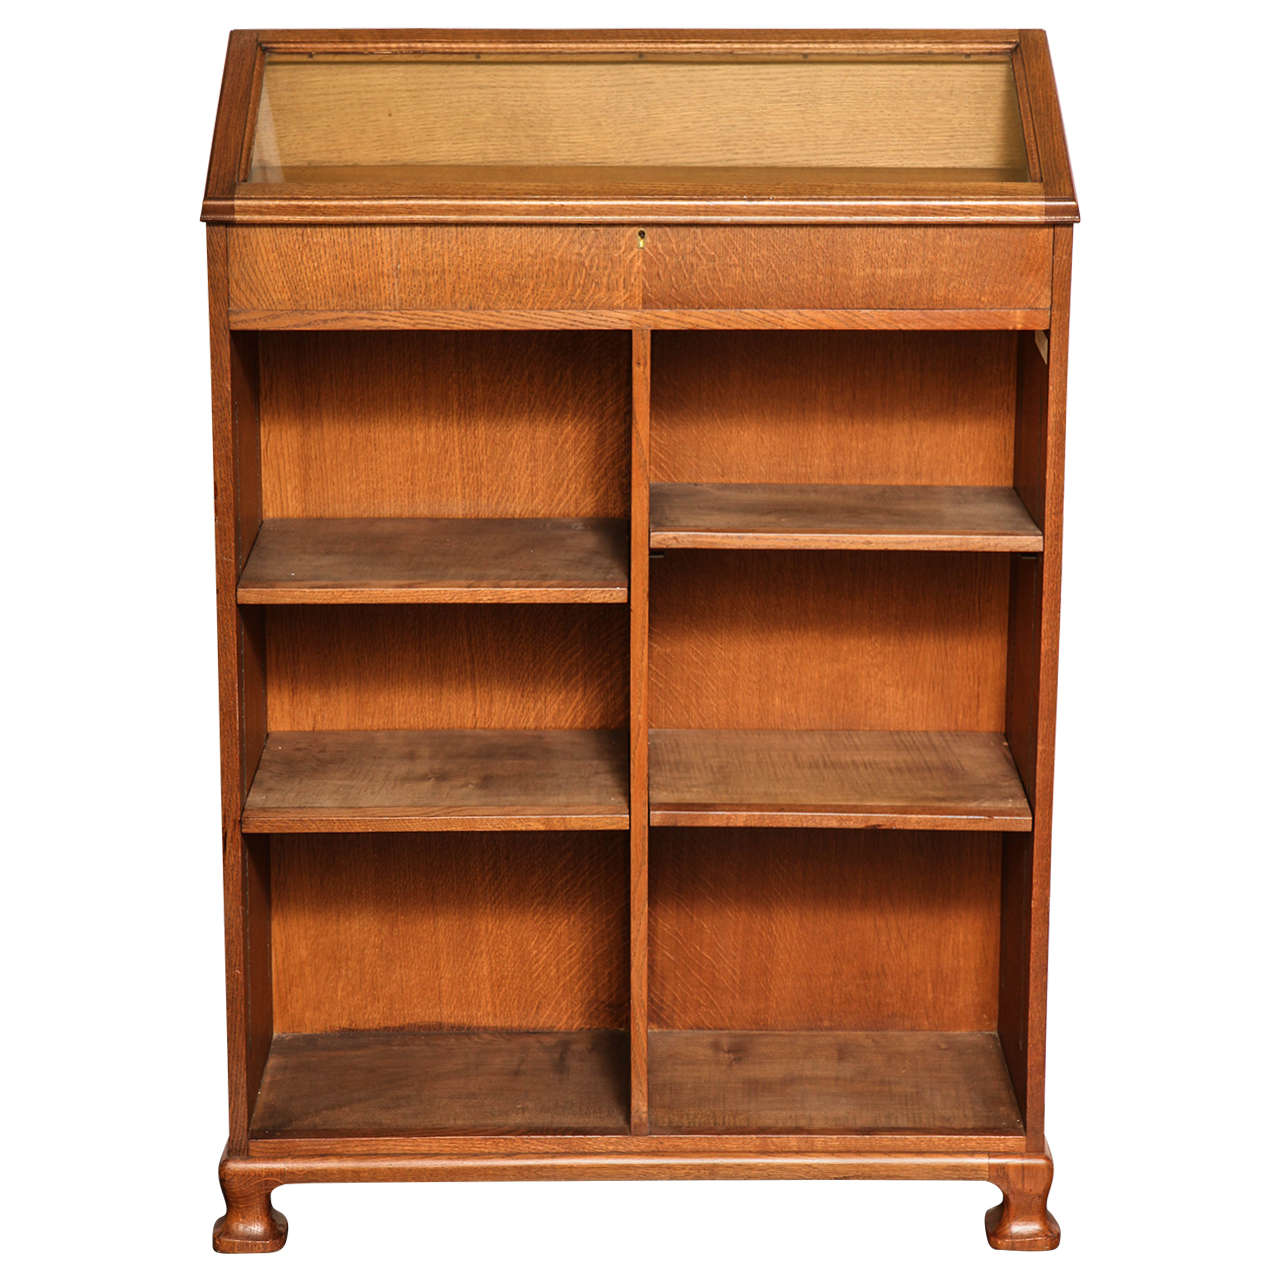 Whitock & Reid Oak Bookcase and Glass Display Case